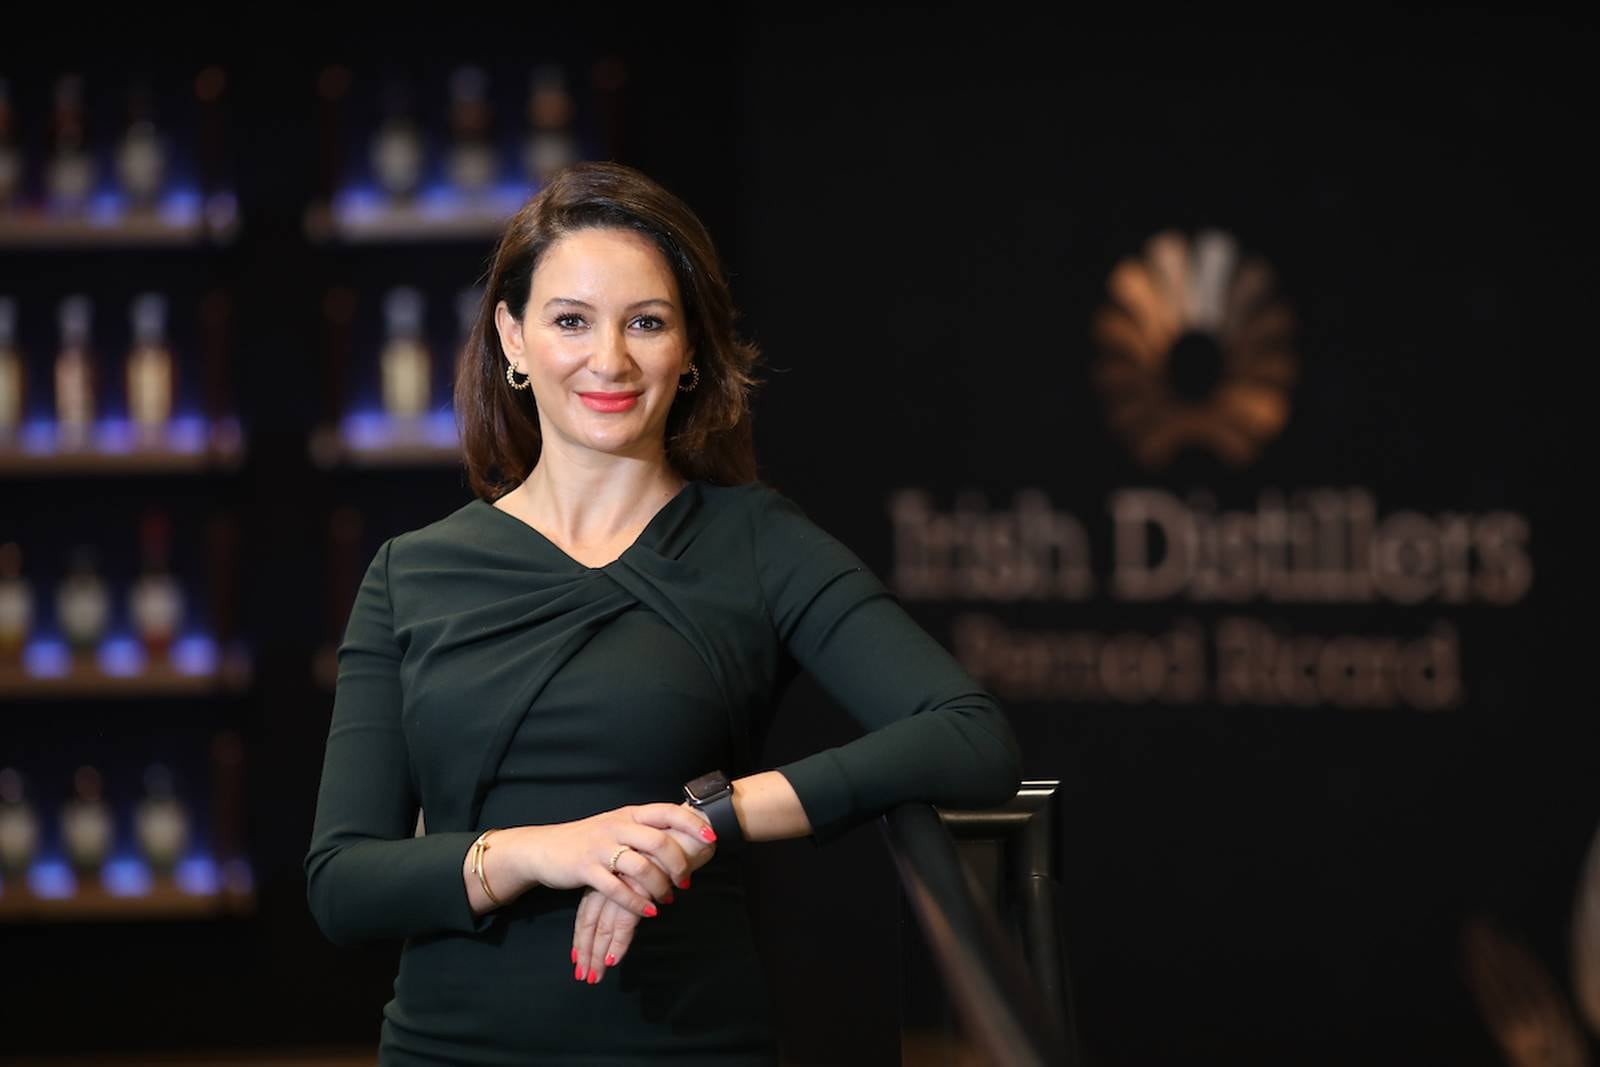 Nodjame Fouad, Chairman and CEO at Irish Distillers